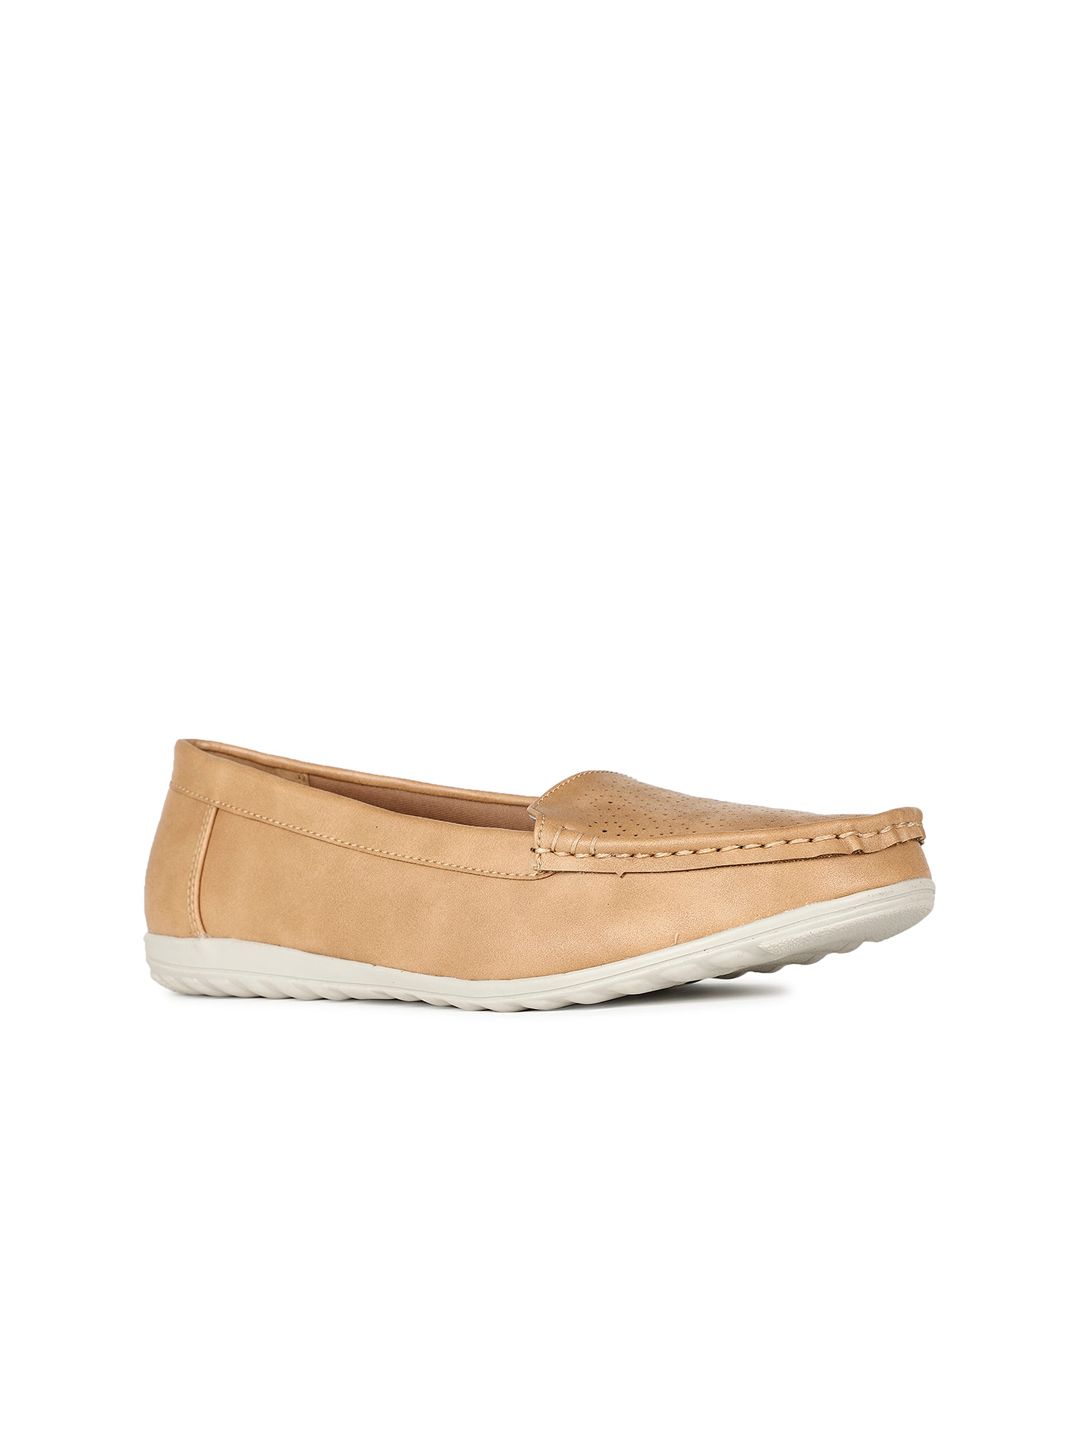 Bata Women Perforations Loafers Price in India